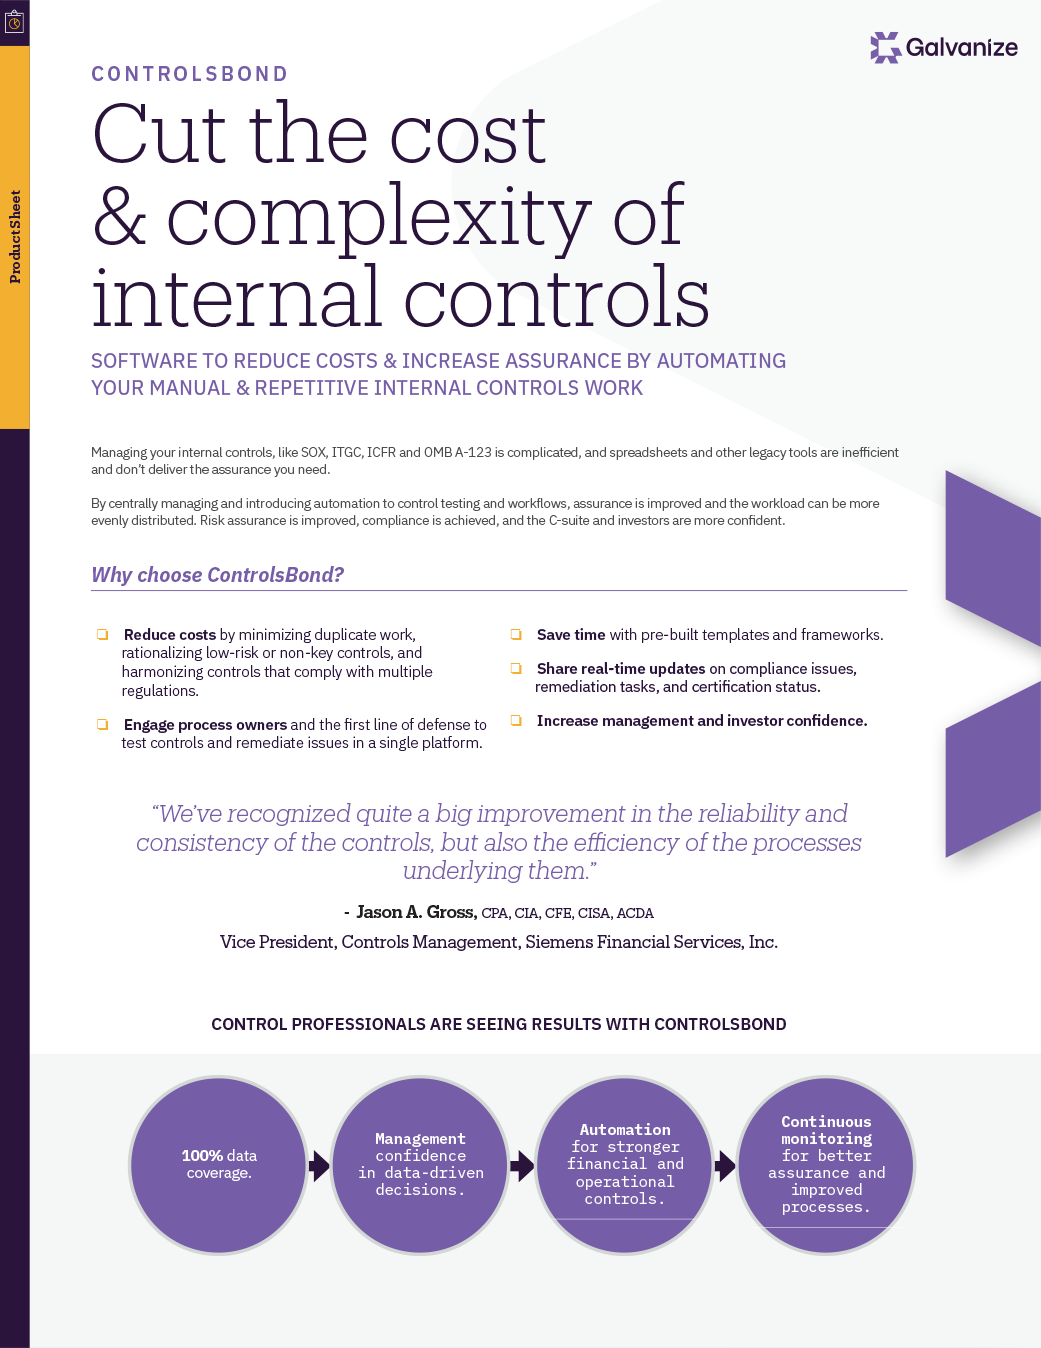 Cut the cost & complexity of internal controls